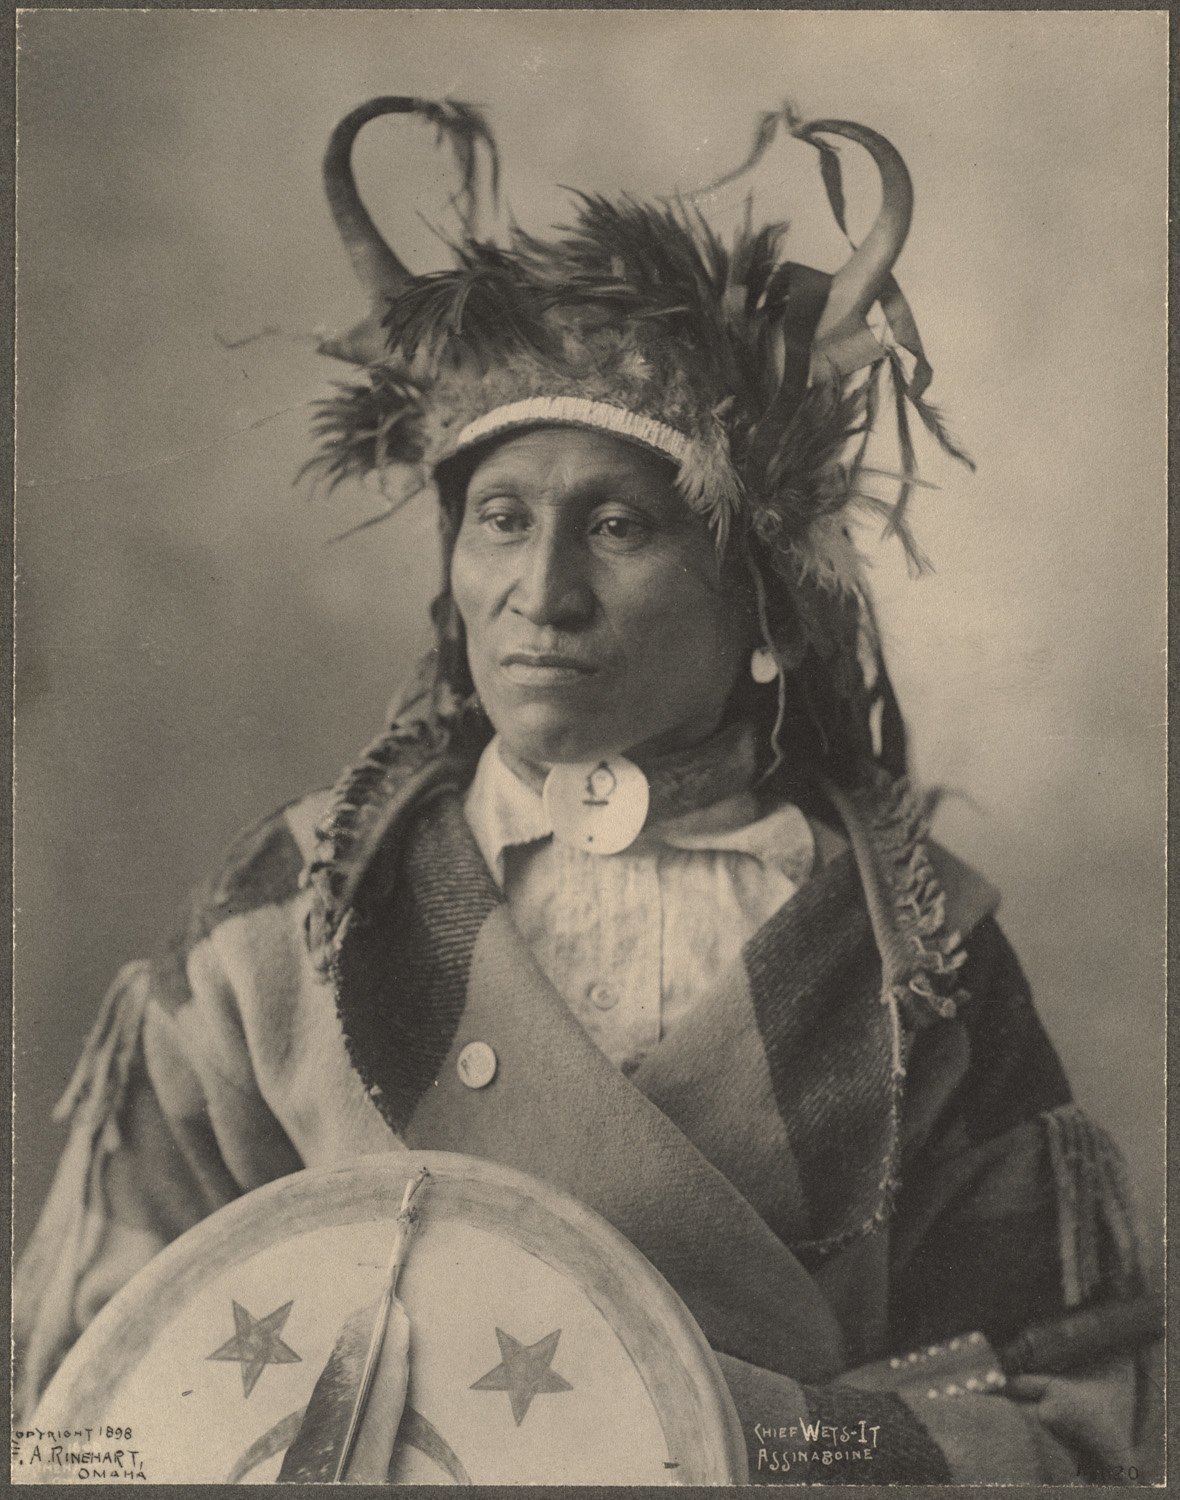 Chief Wets-It, Assinaboine, 1899. (Photo by Frank A. Rinehart)